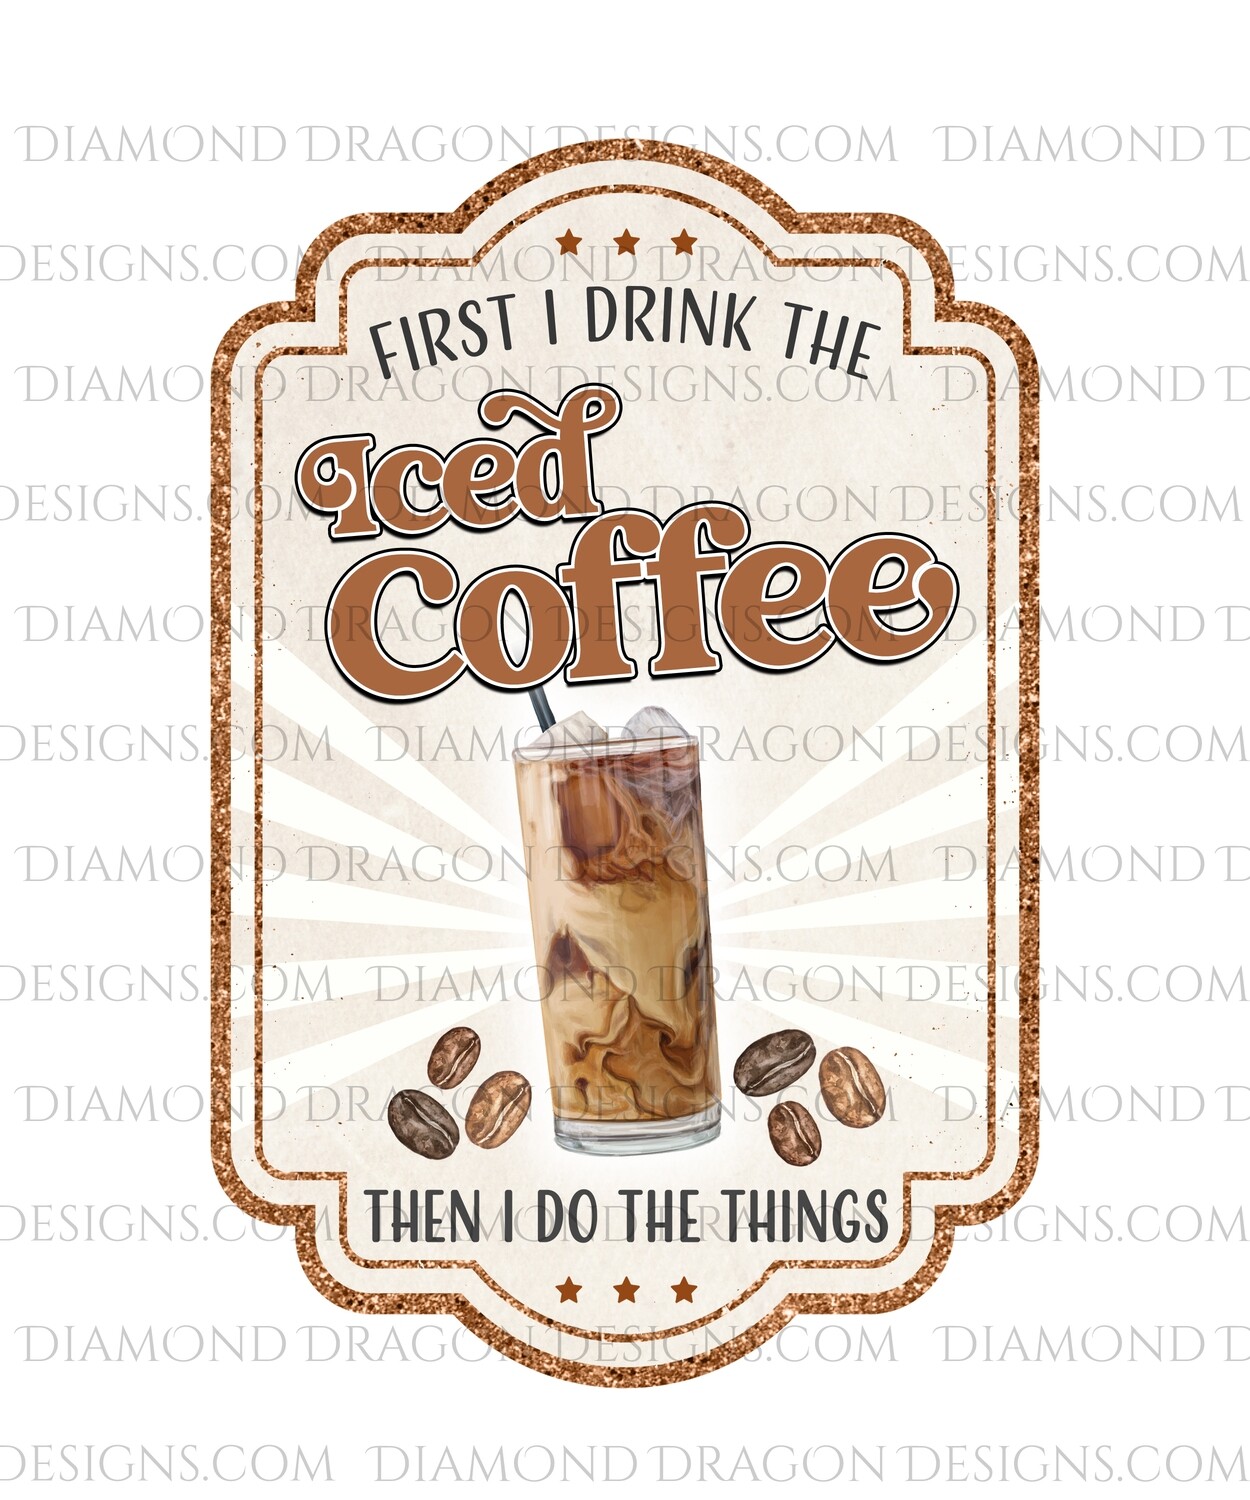 Quote - First I Drink The Coffee, Then I Do the Things, Digital Image